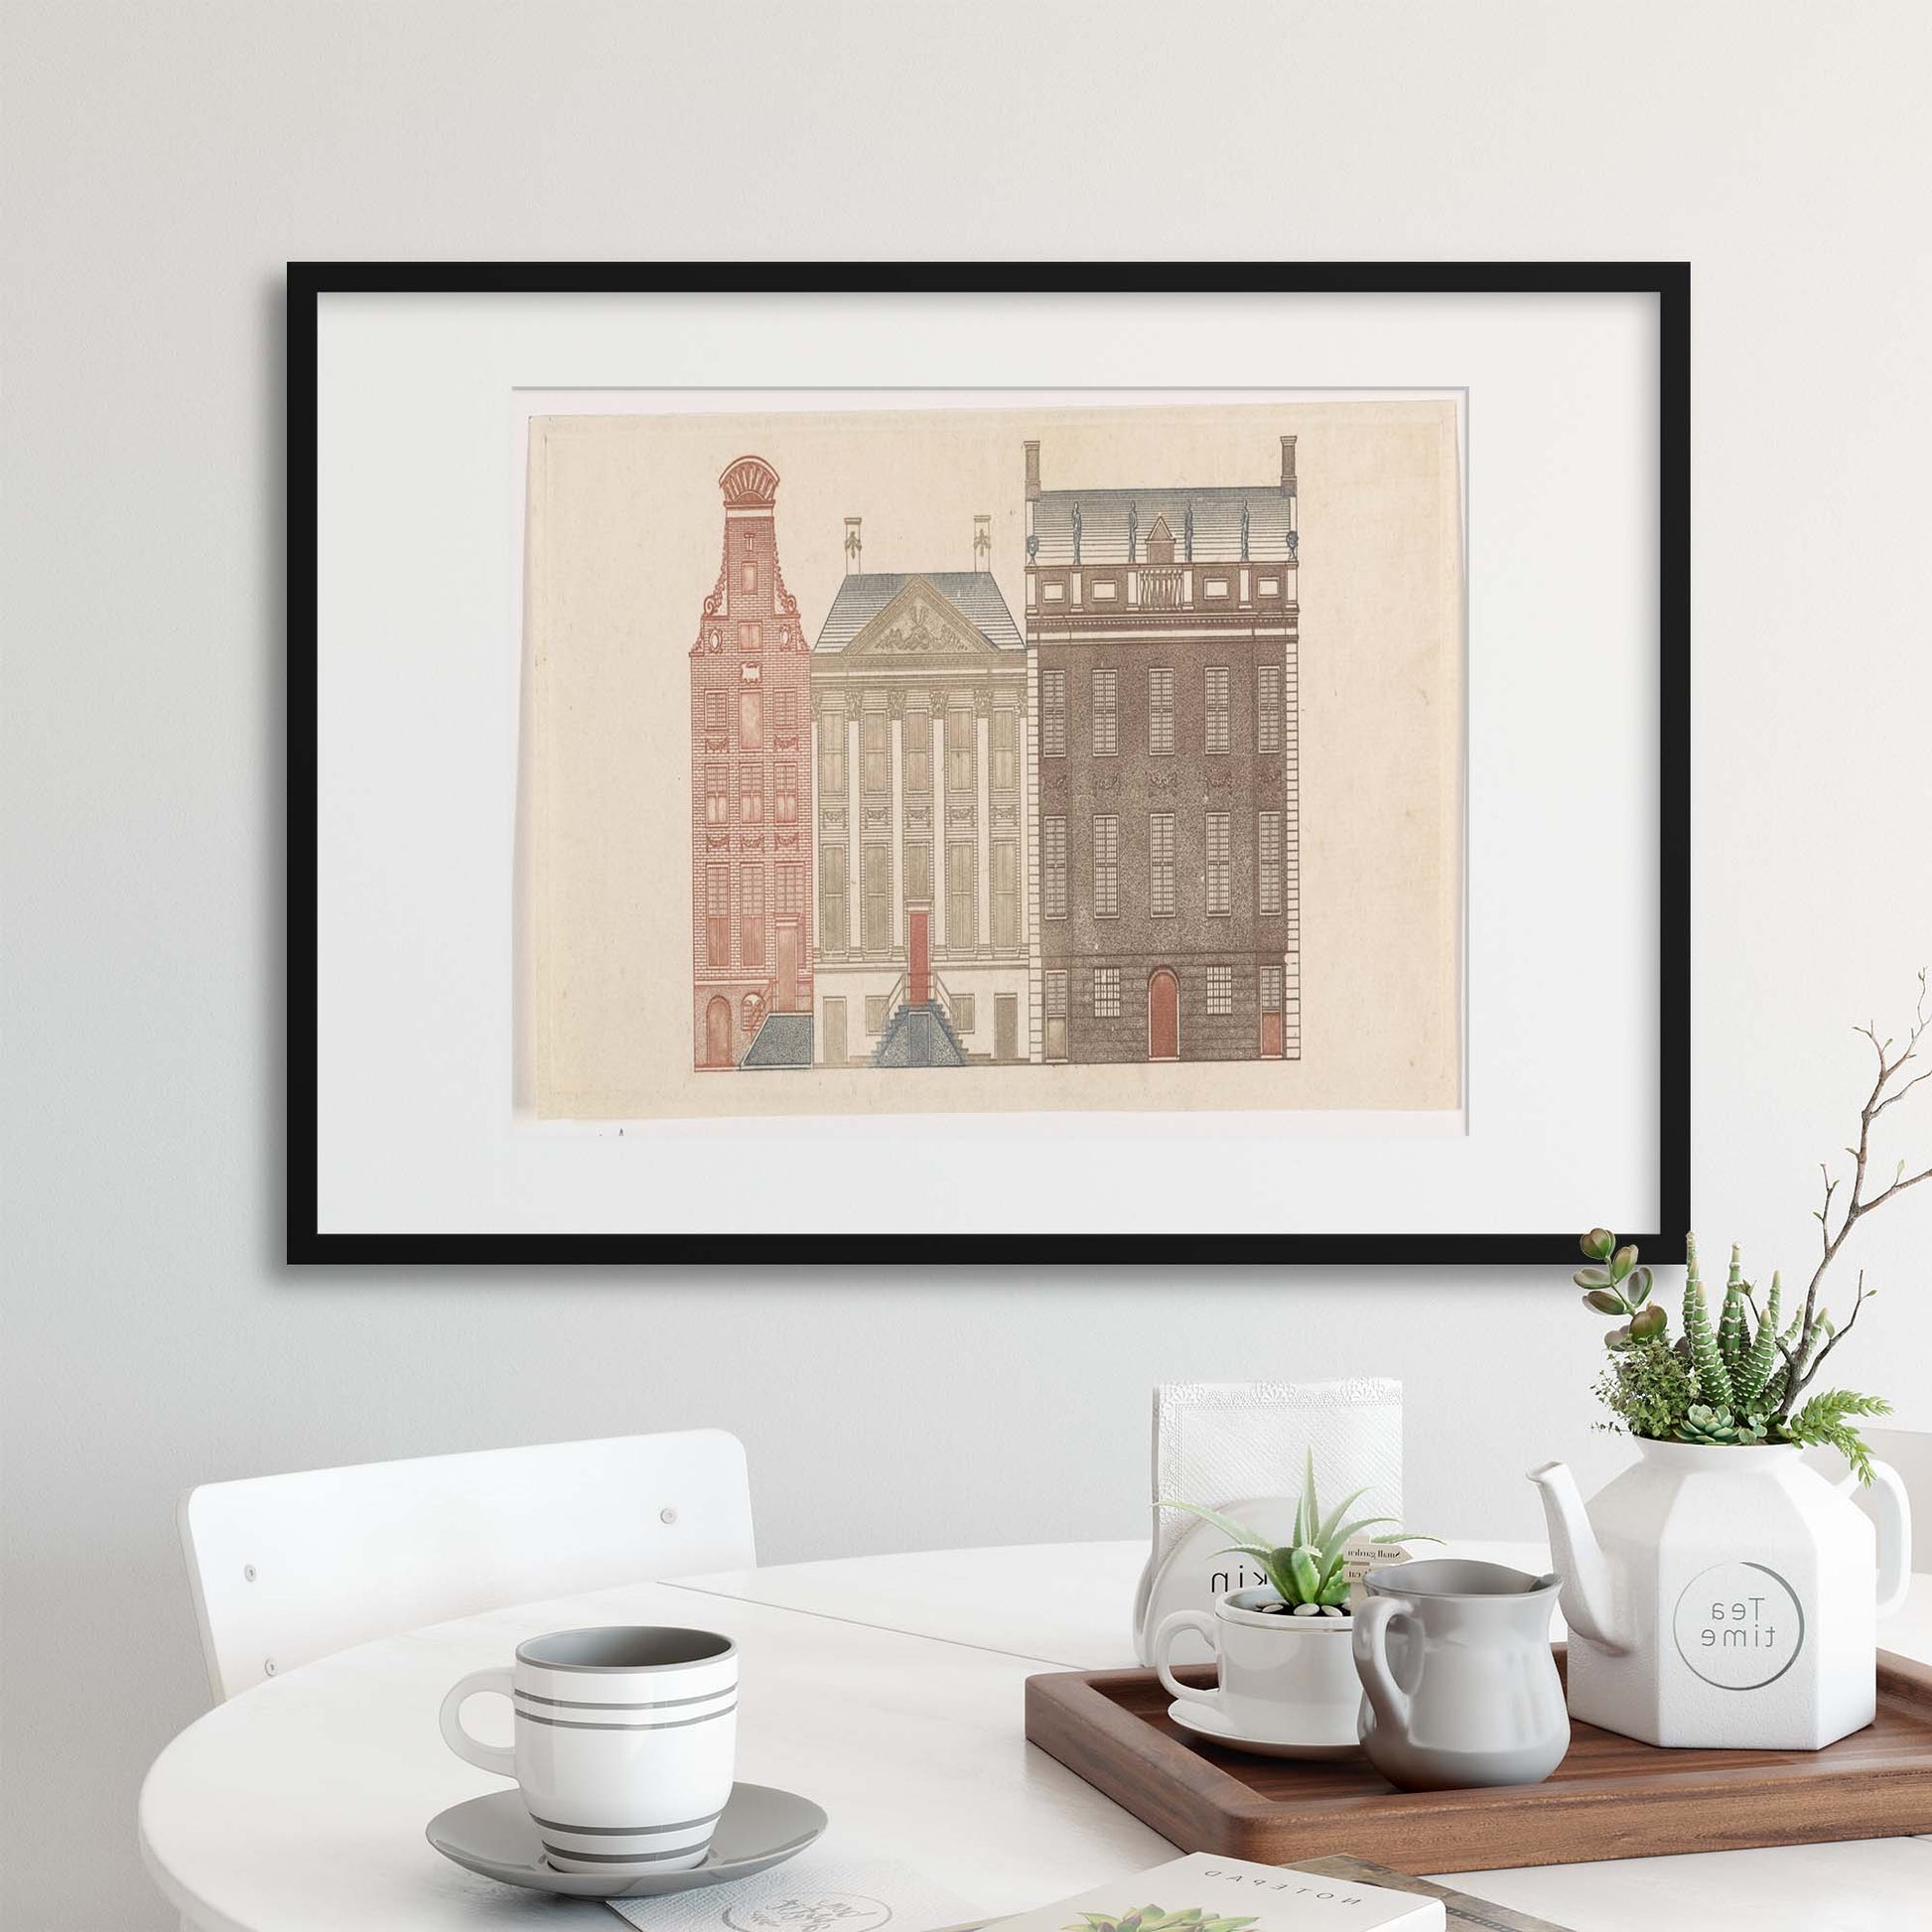 Classical Architecture, Illustrated - III Framed Print - USTAD HOME